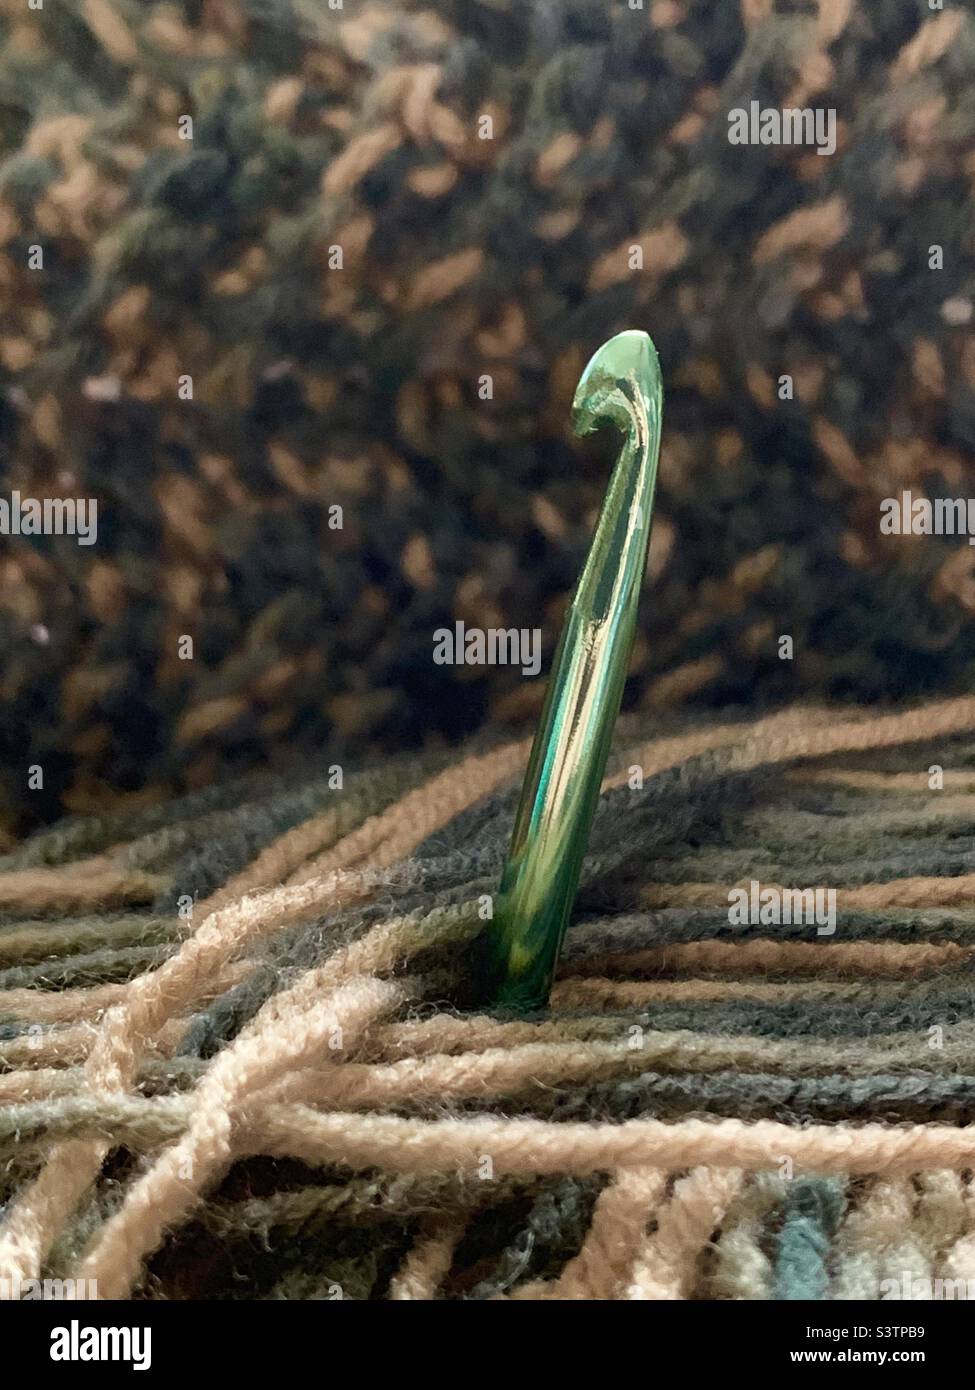 Green aluminum crochet hook in ball of yarn with crocheted blanket in background Stock Photo